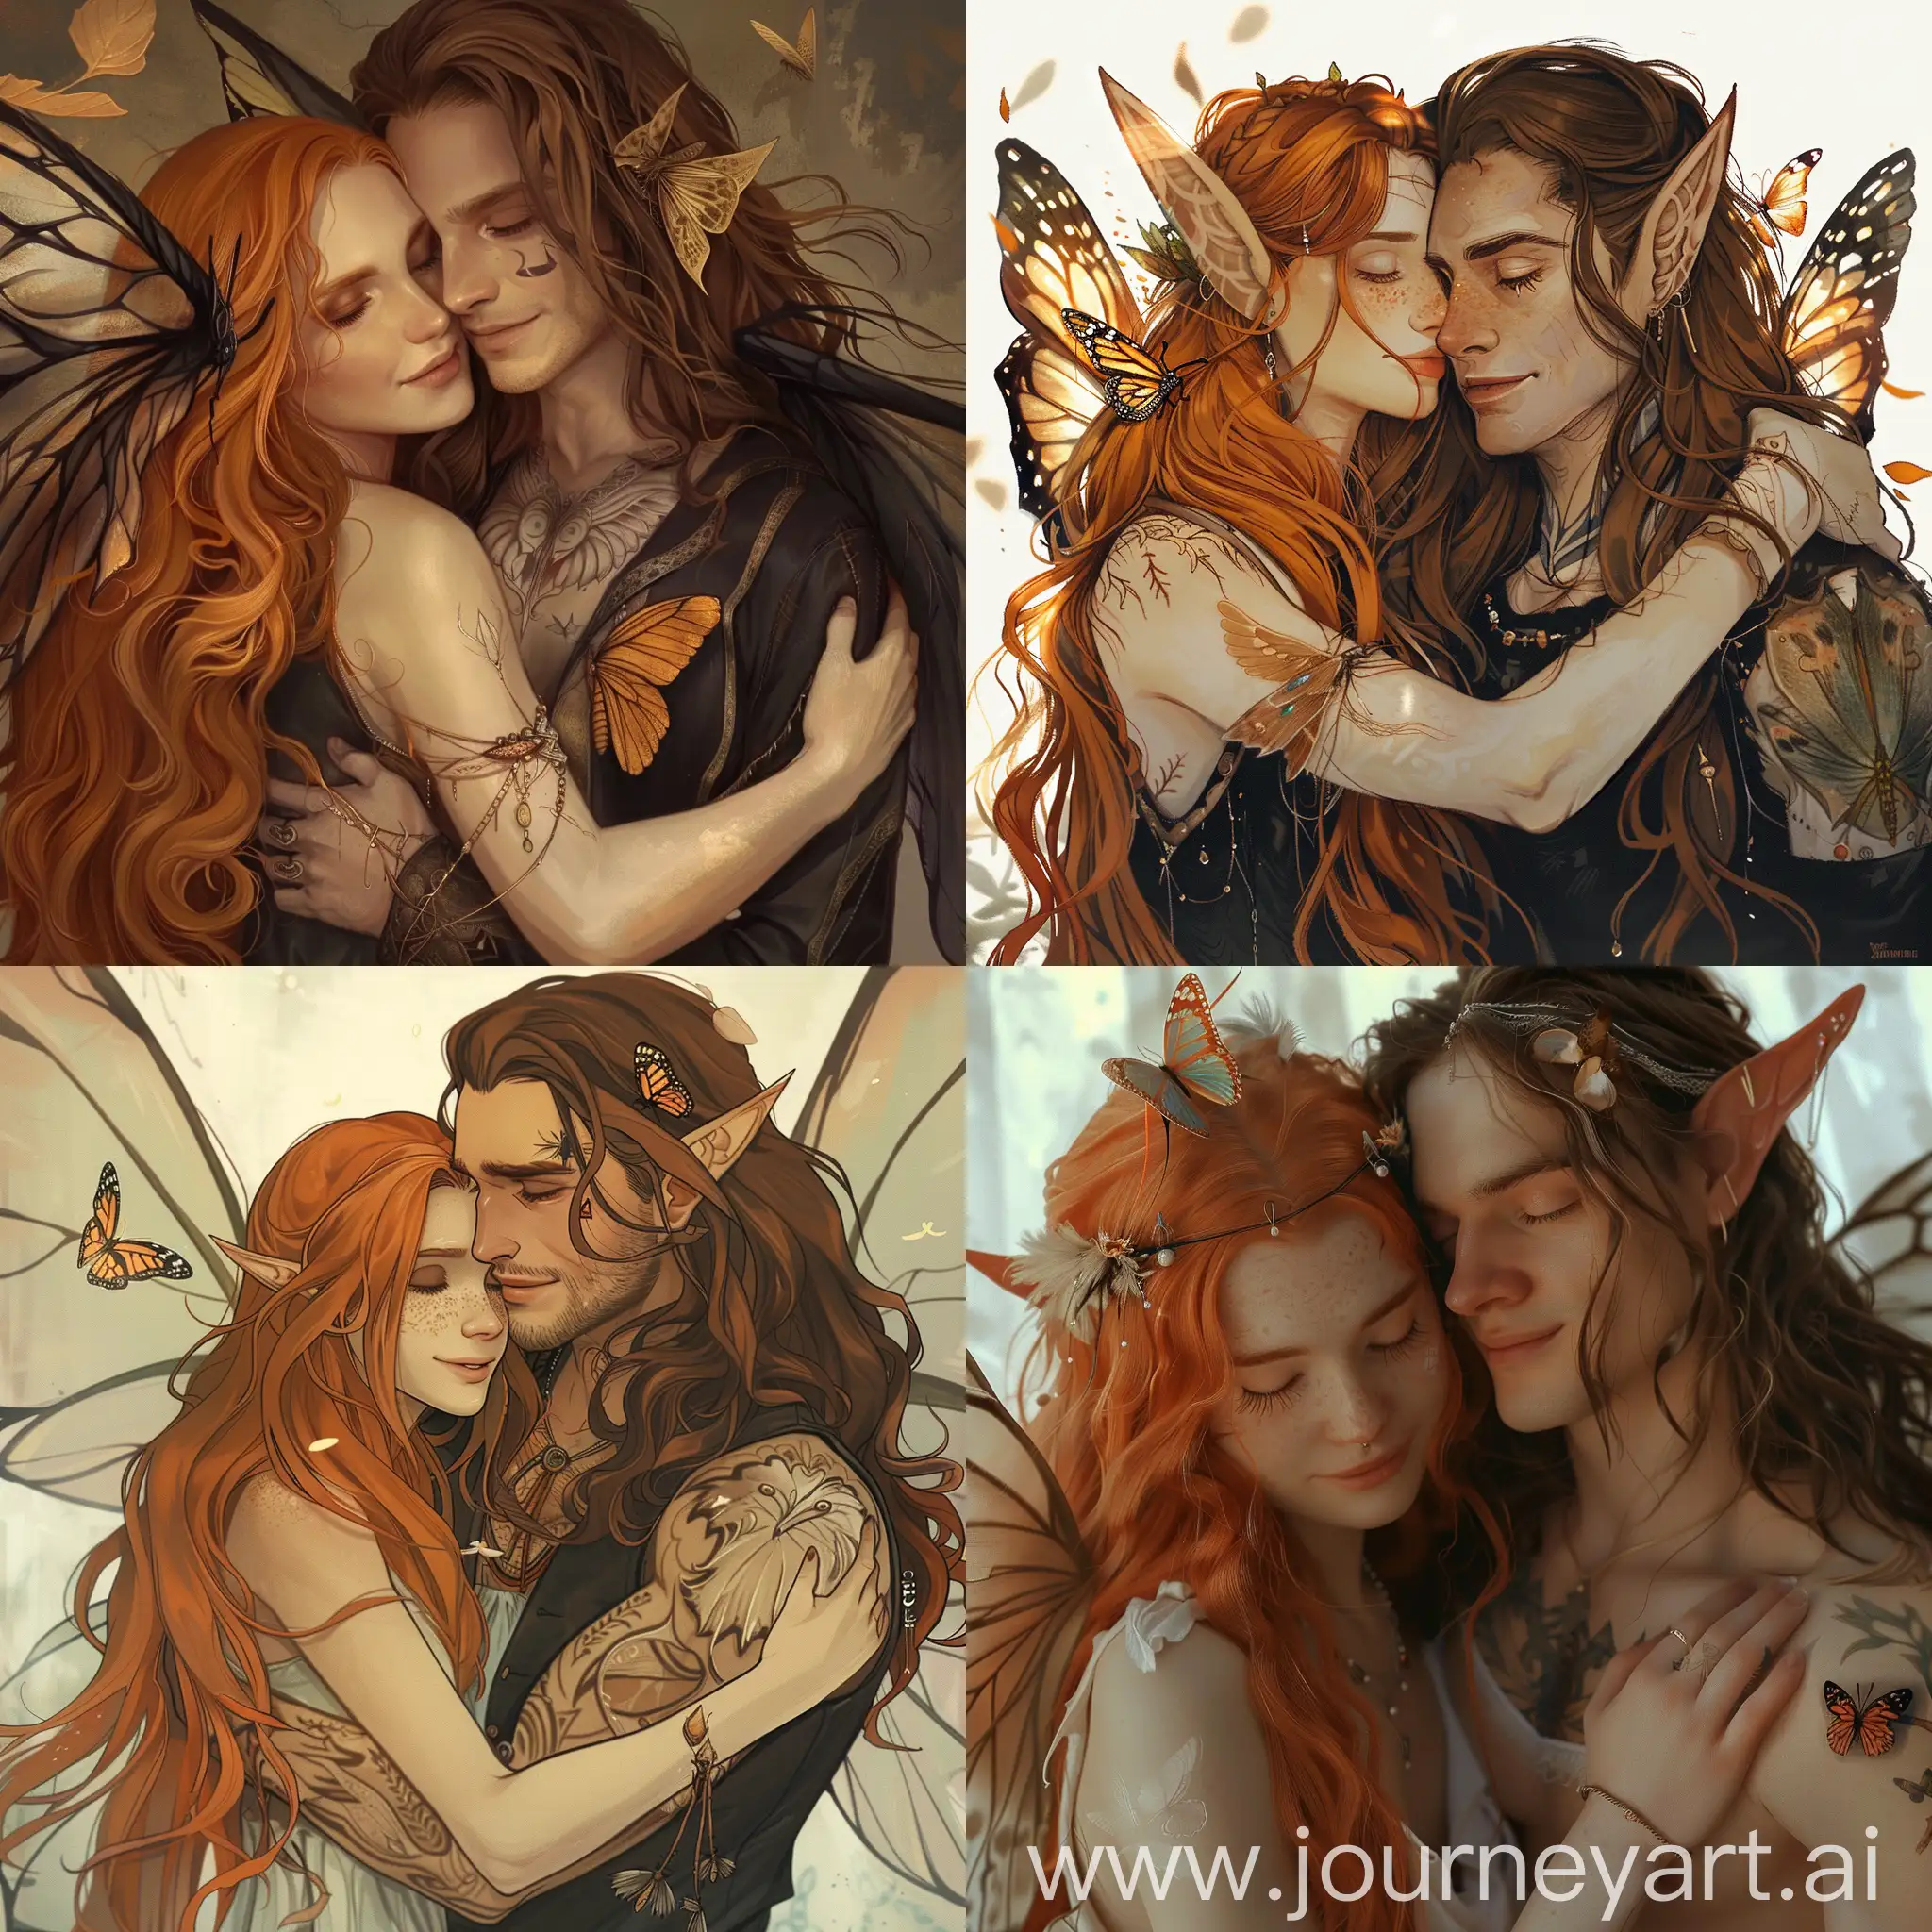 A man and a woman are hugging. The woman has simurg wings and has long ginger hair. The man has long brown hair and a butterfly tattoo on his chest. 